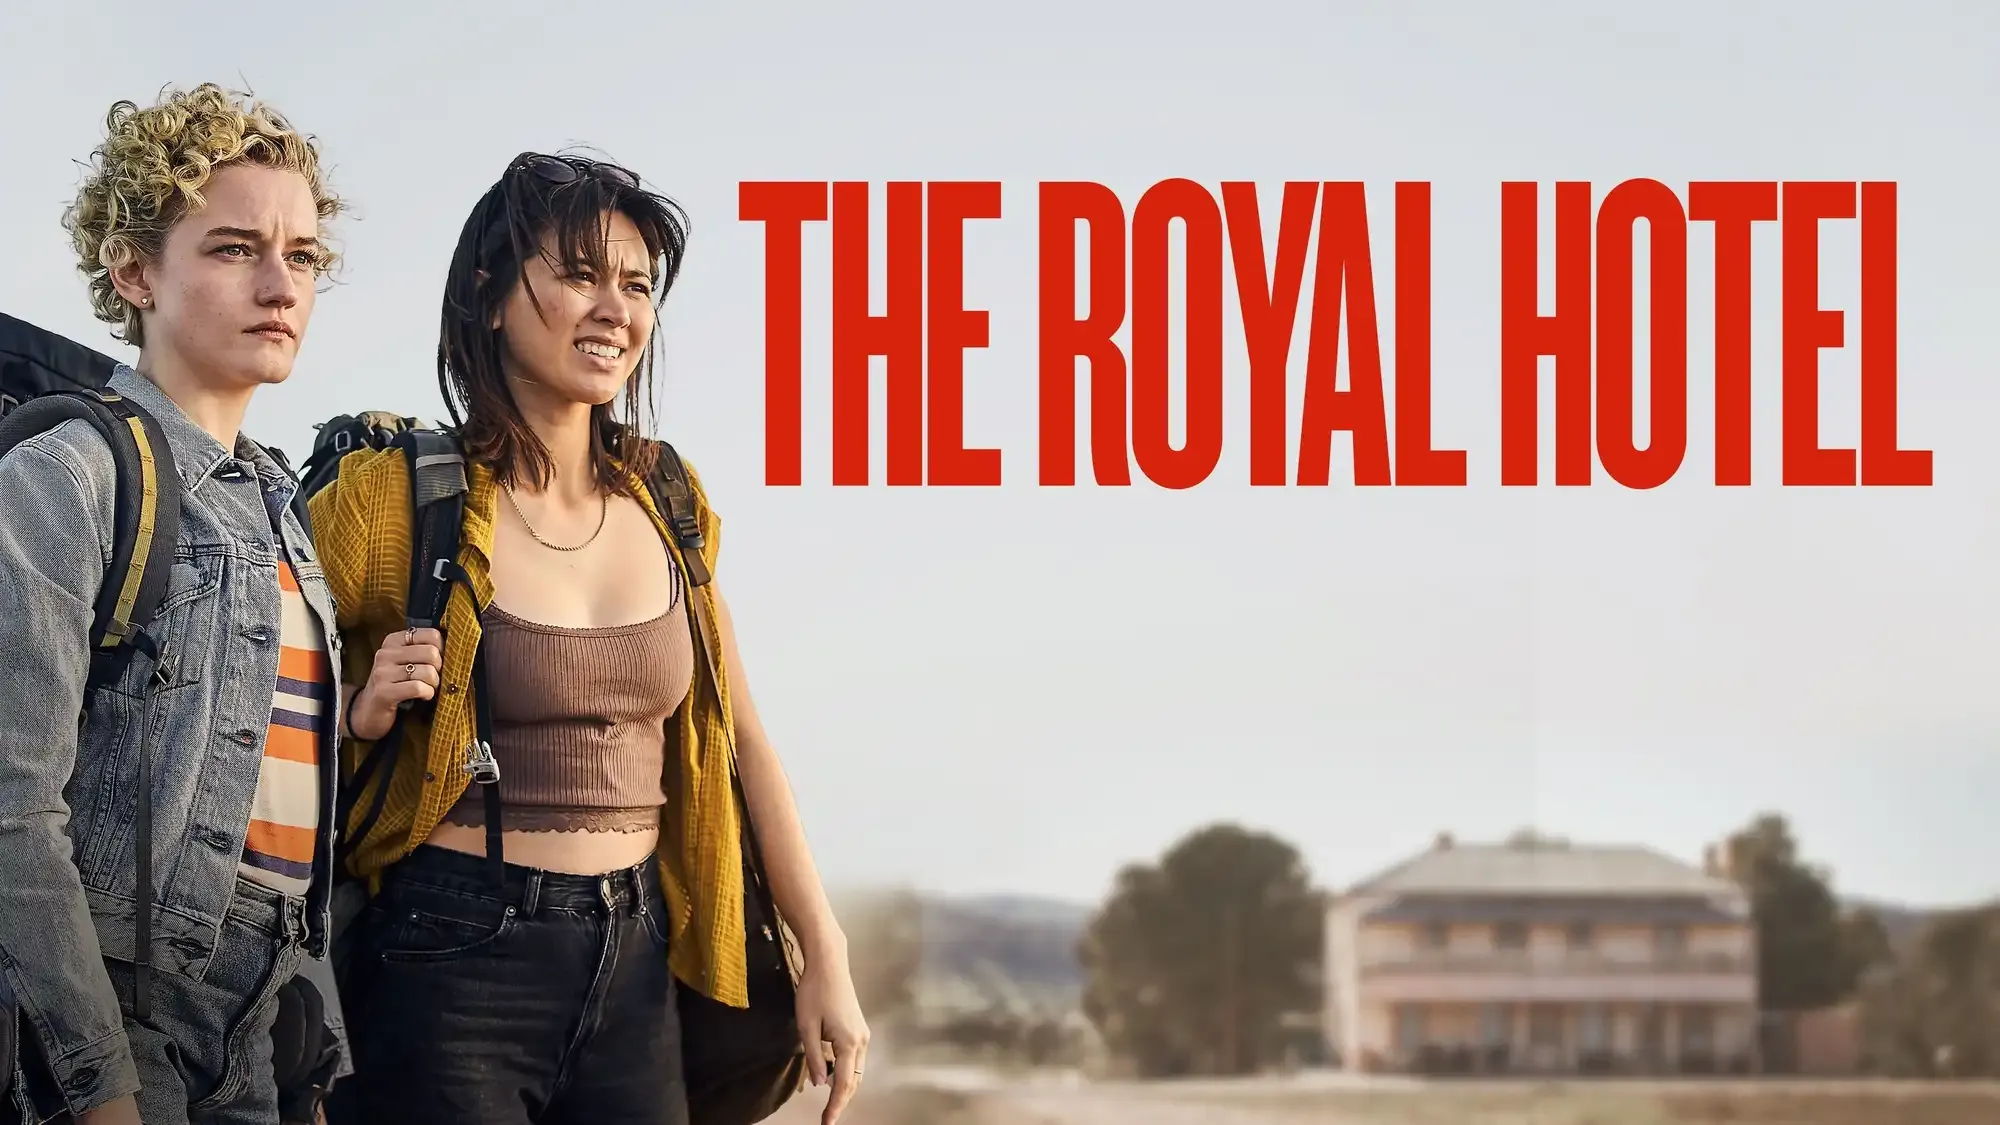 The Royal Hotel movie review